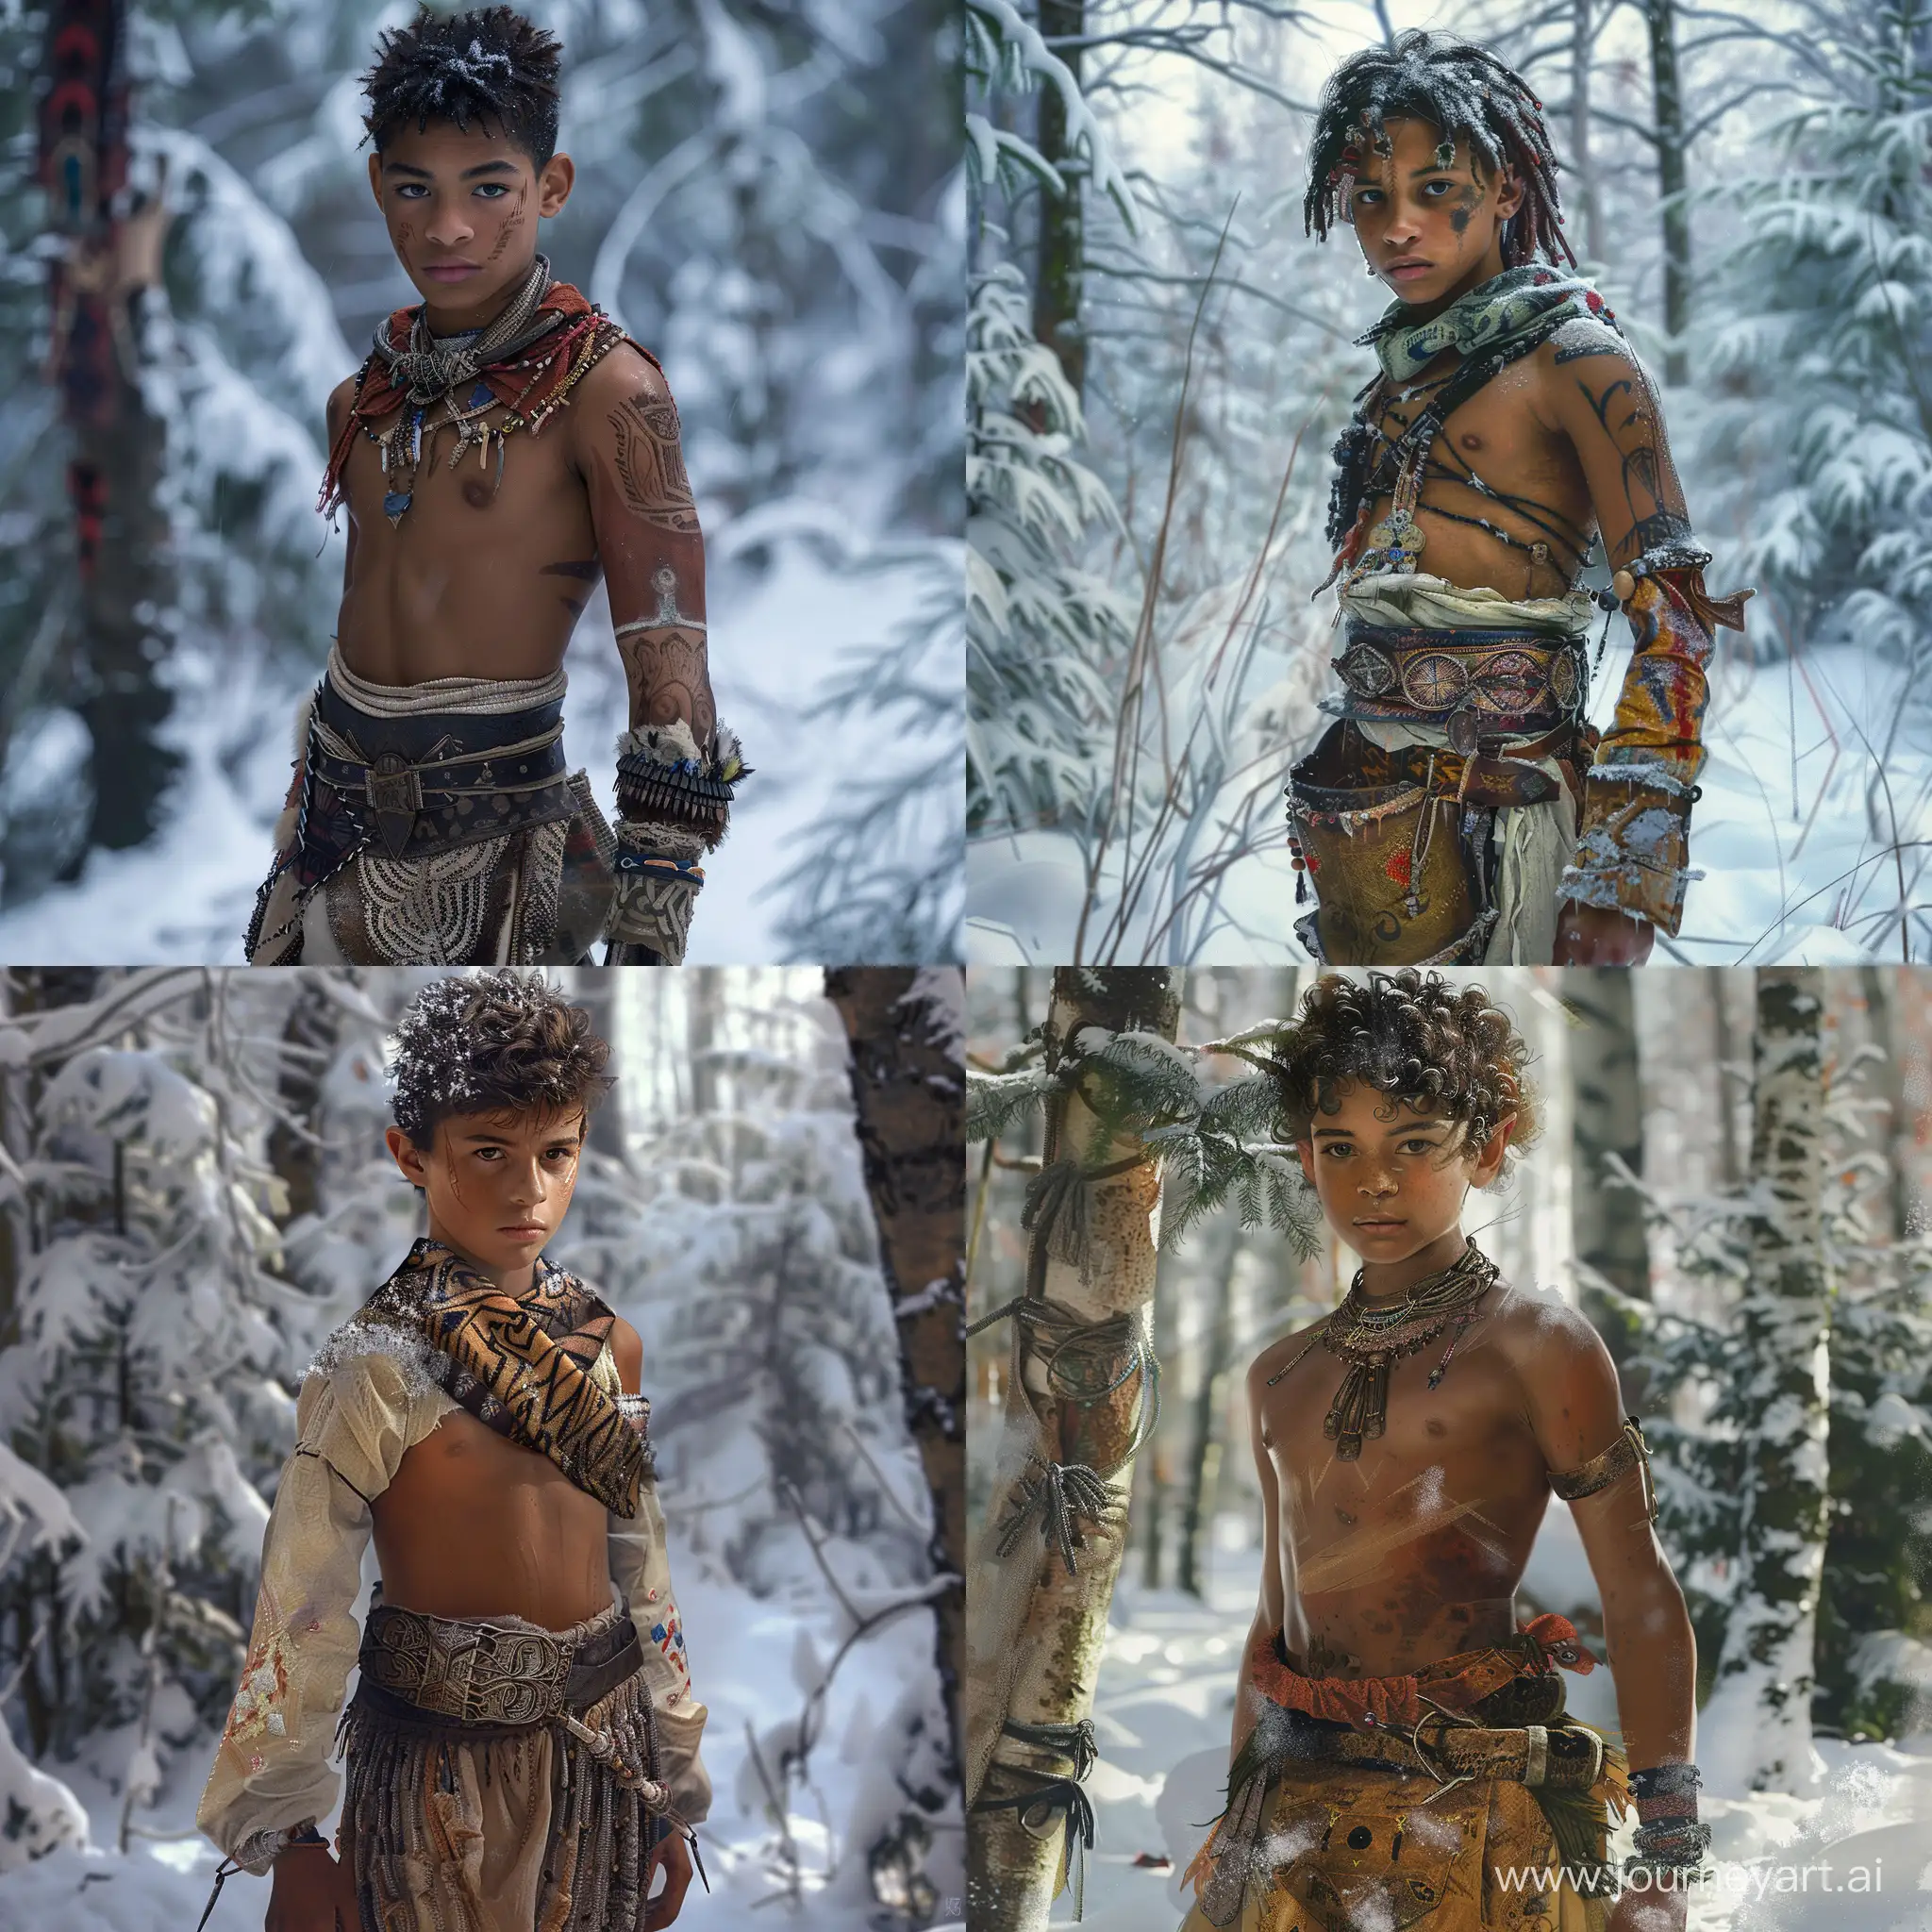 A young, 15 years old argonian in the snowy forest. He wears a waist belt and tribal clothes.